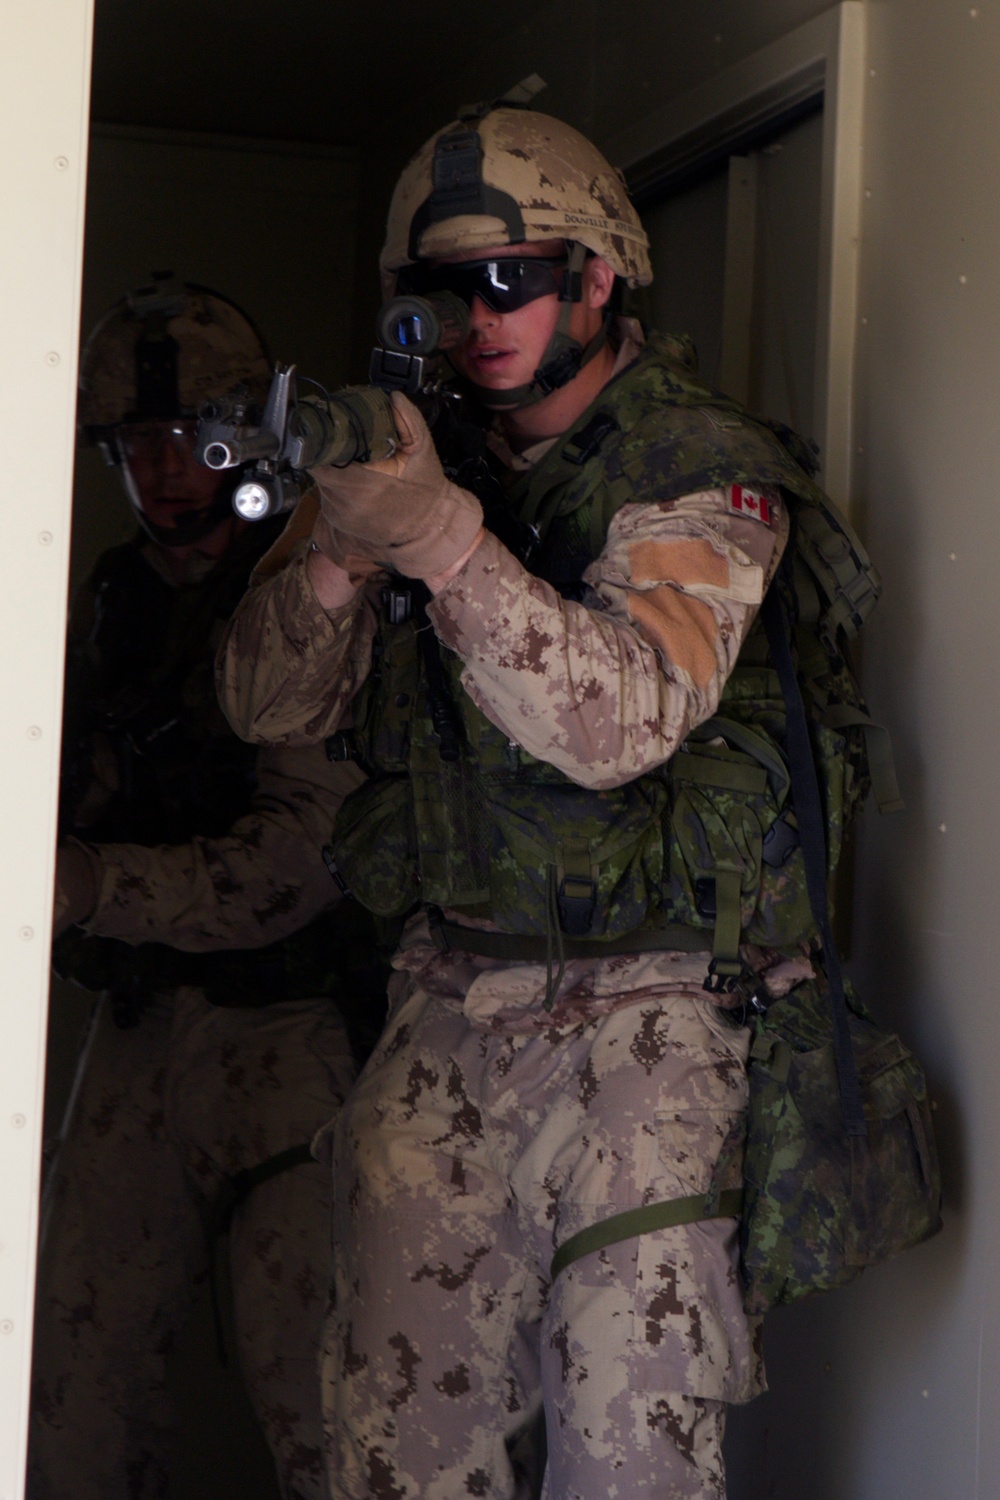 Canadian soldiers demonstrate room-clearing capabilities during Dawn Blitz 2013